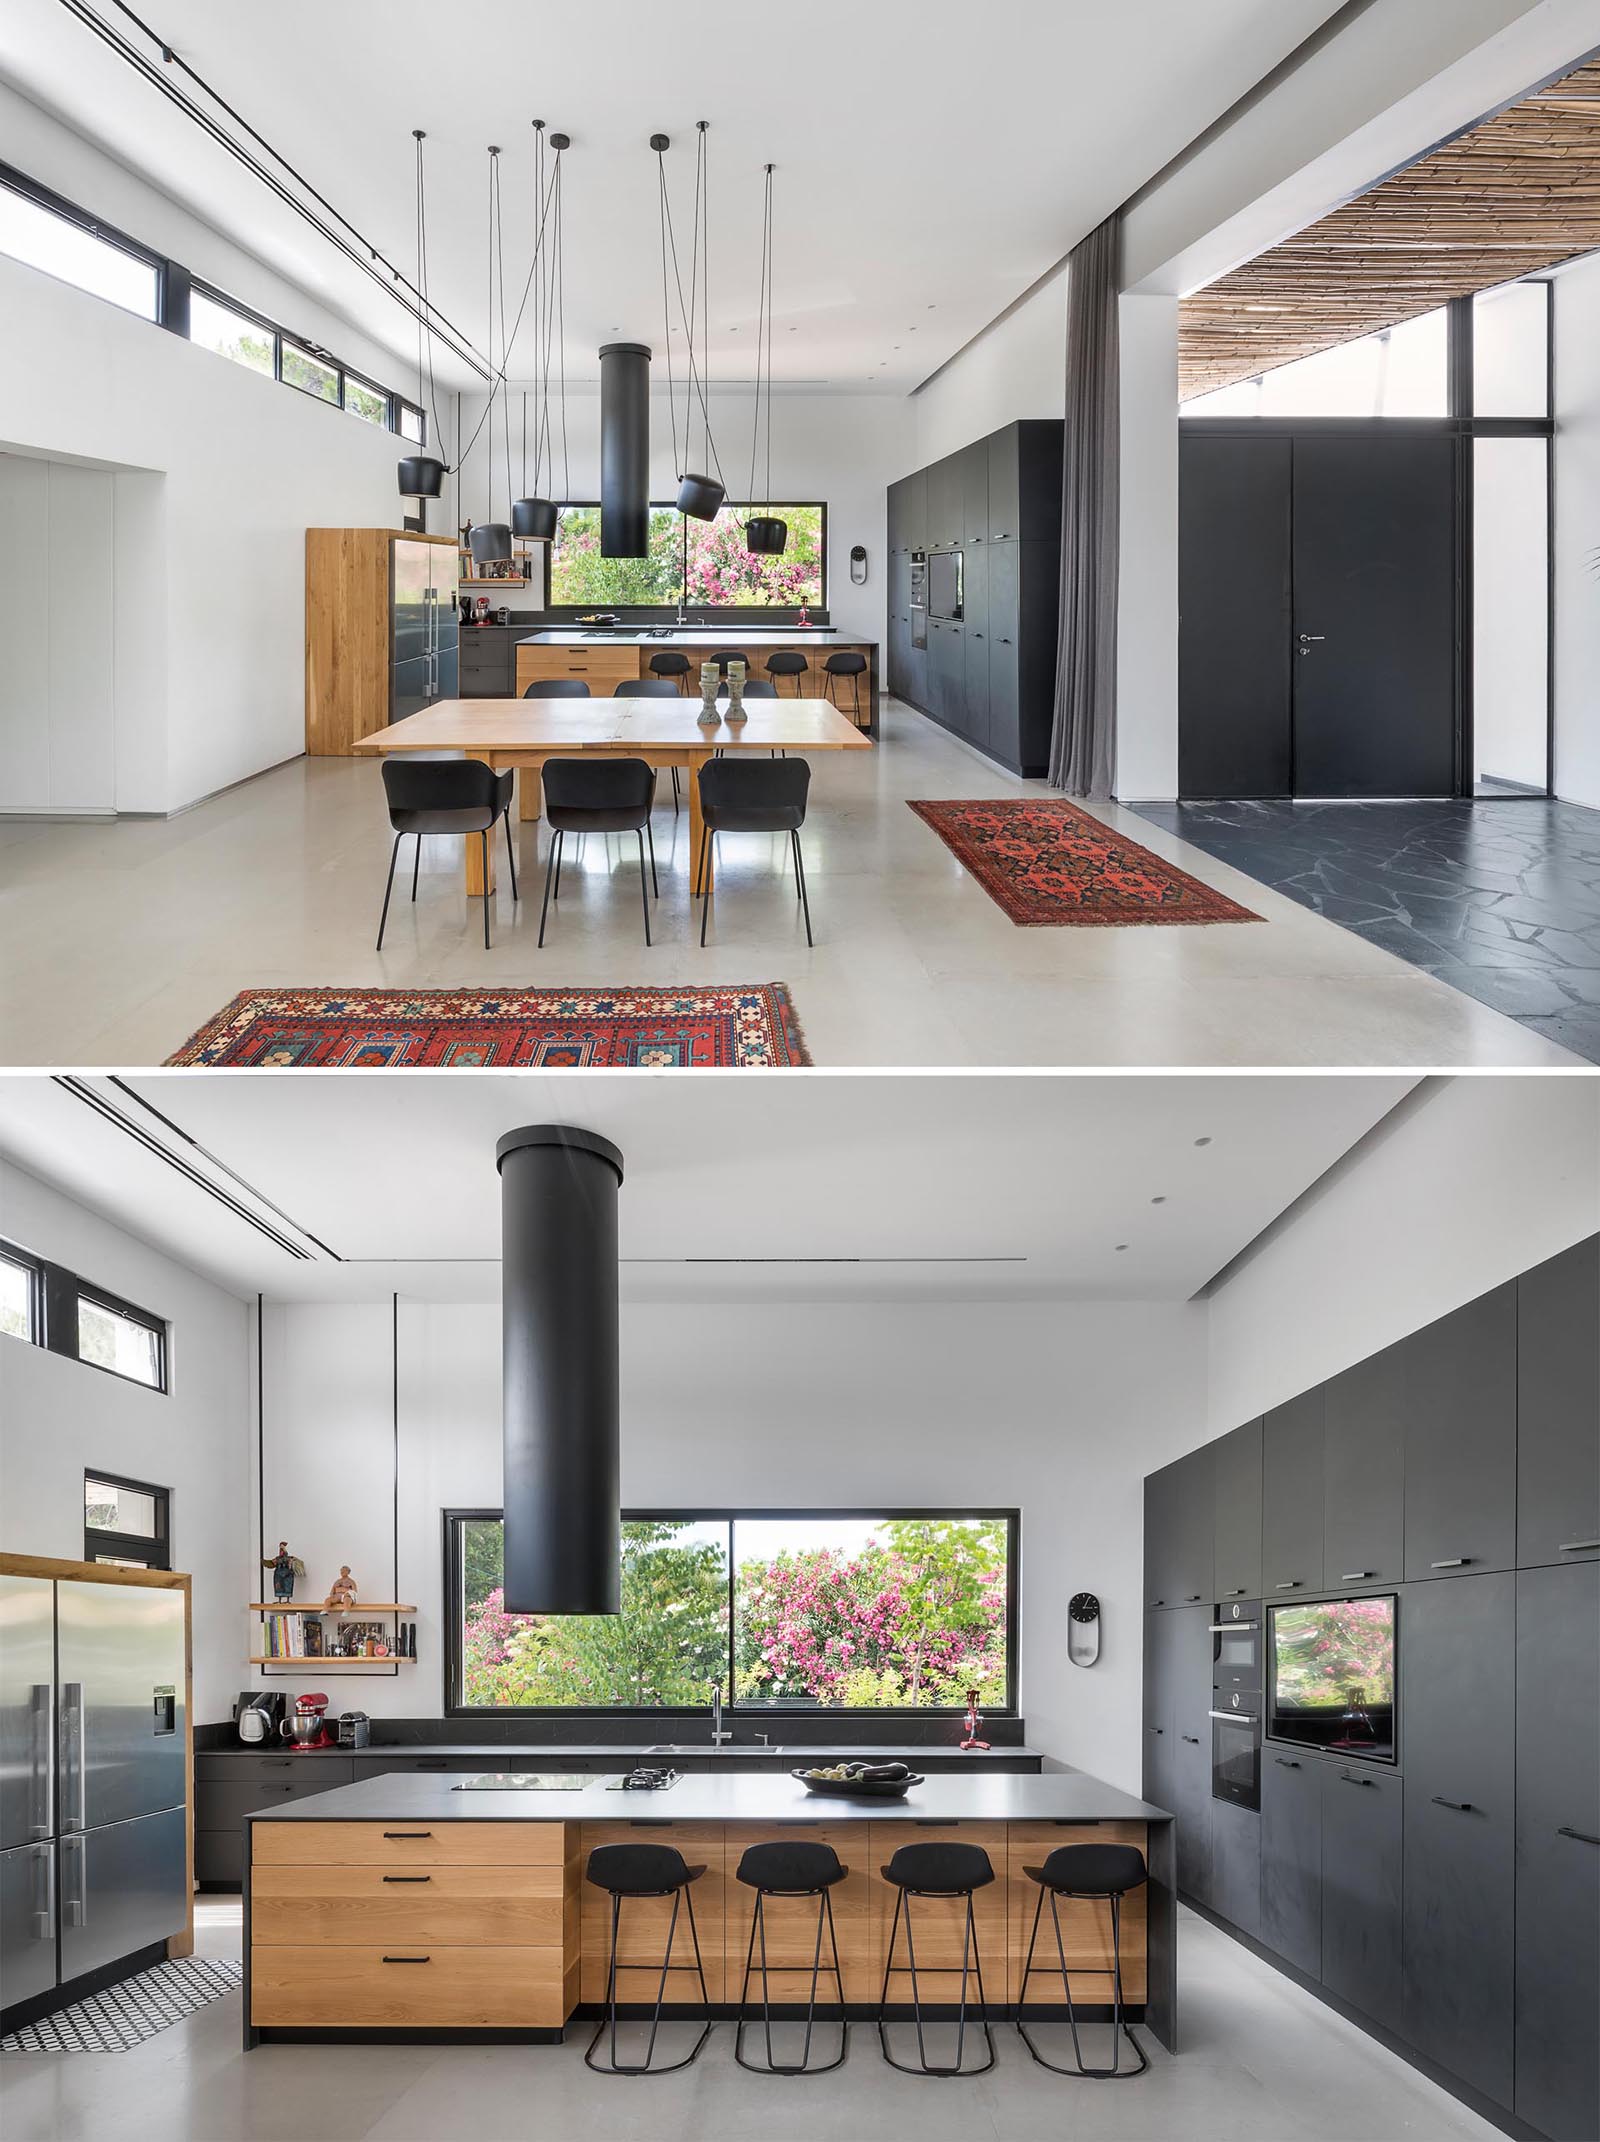 This modern kitchen includes minimalist black cabinets, black countertops, and wood accents.